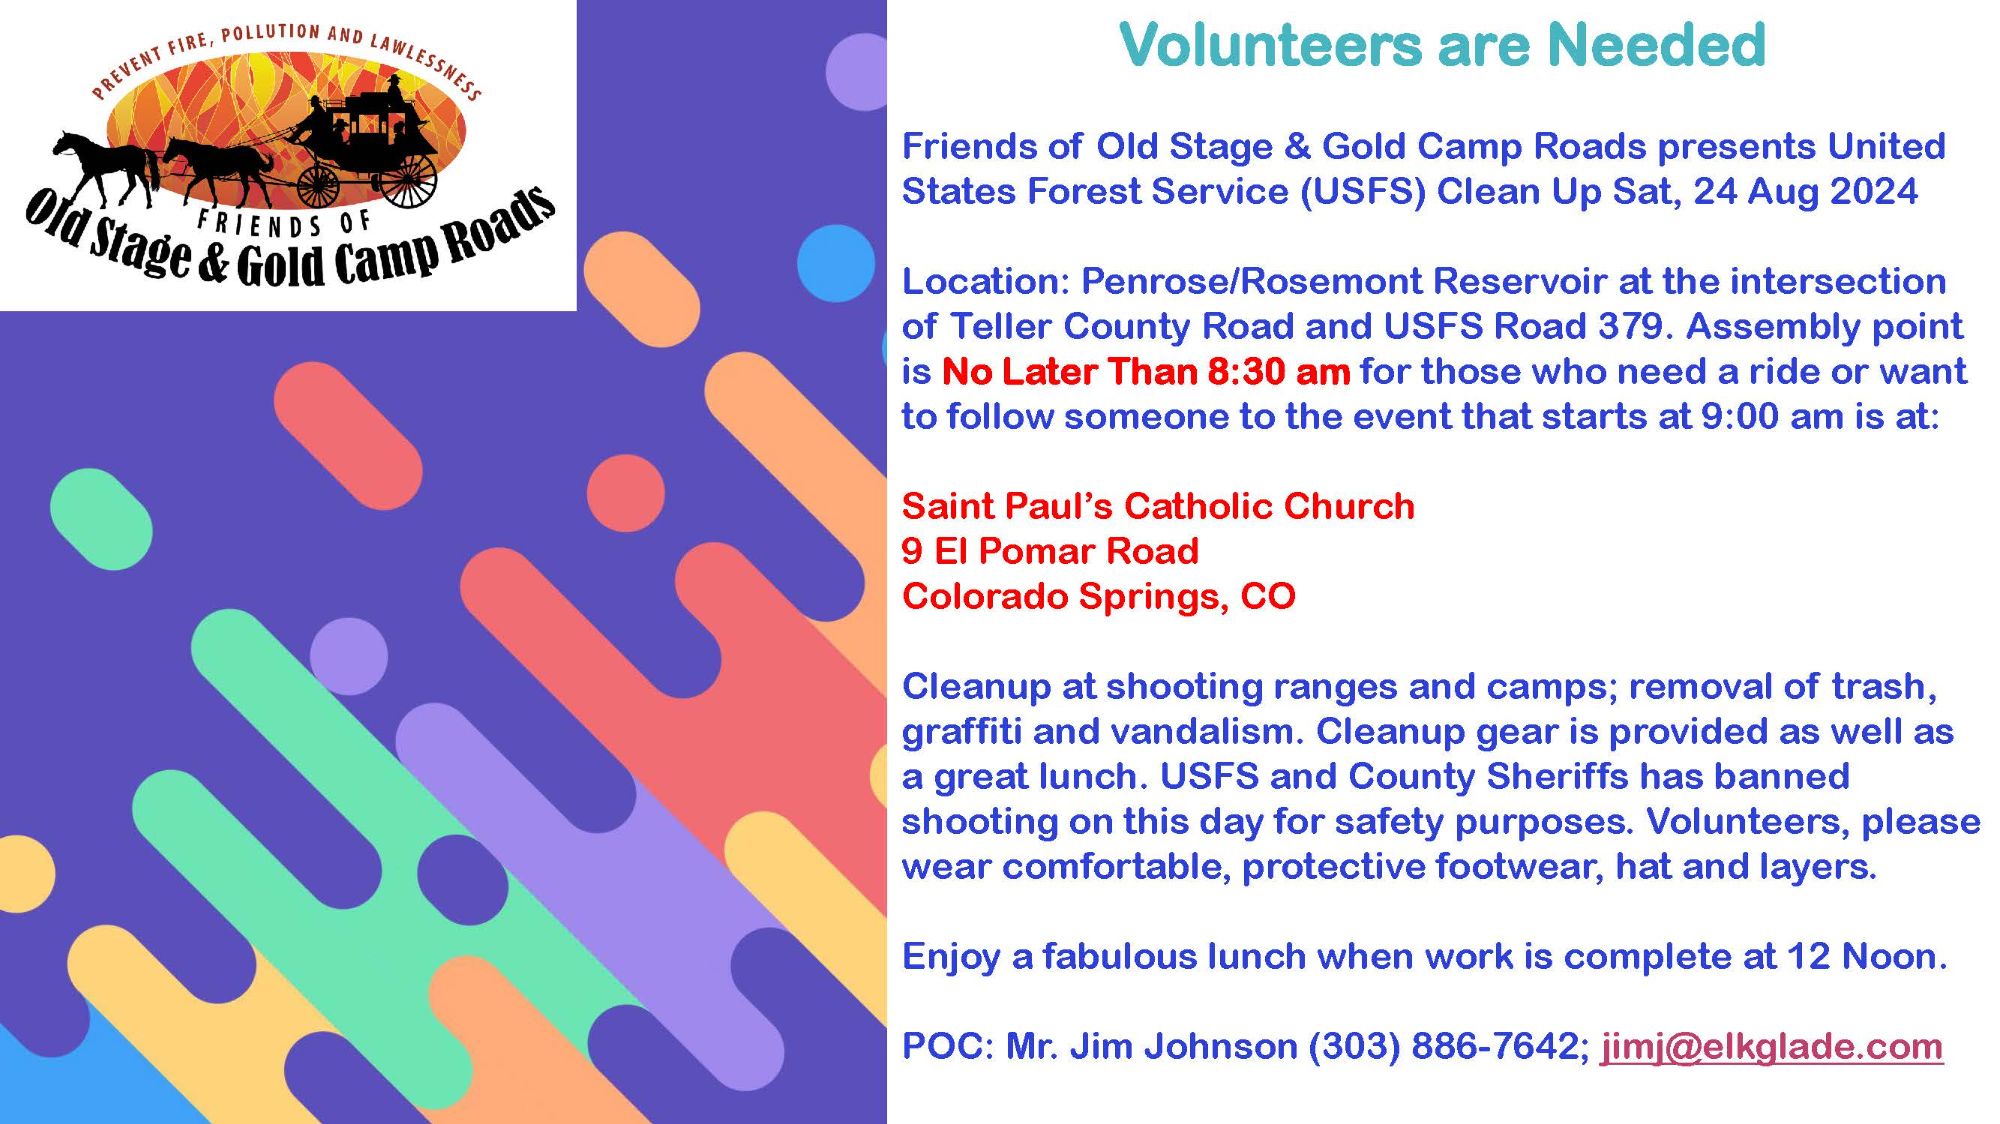 United States Forest Service (USFS) Clean Up Sat, 24 Aug 2024, 9:00 am - 12:00 Noon